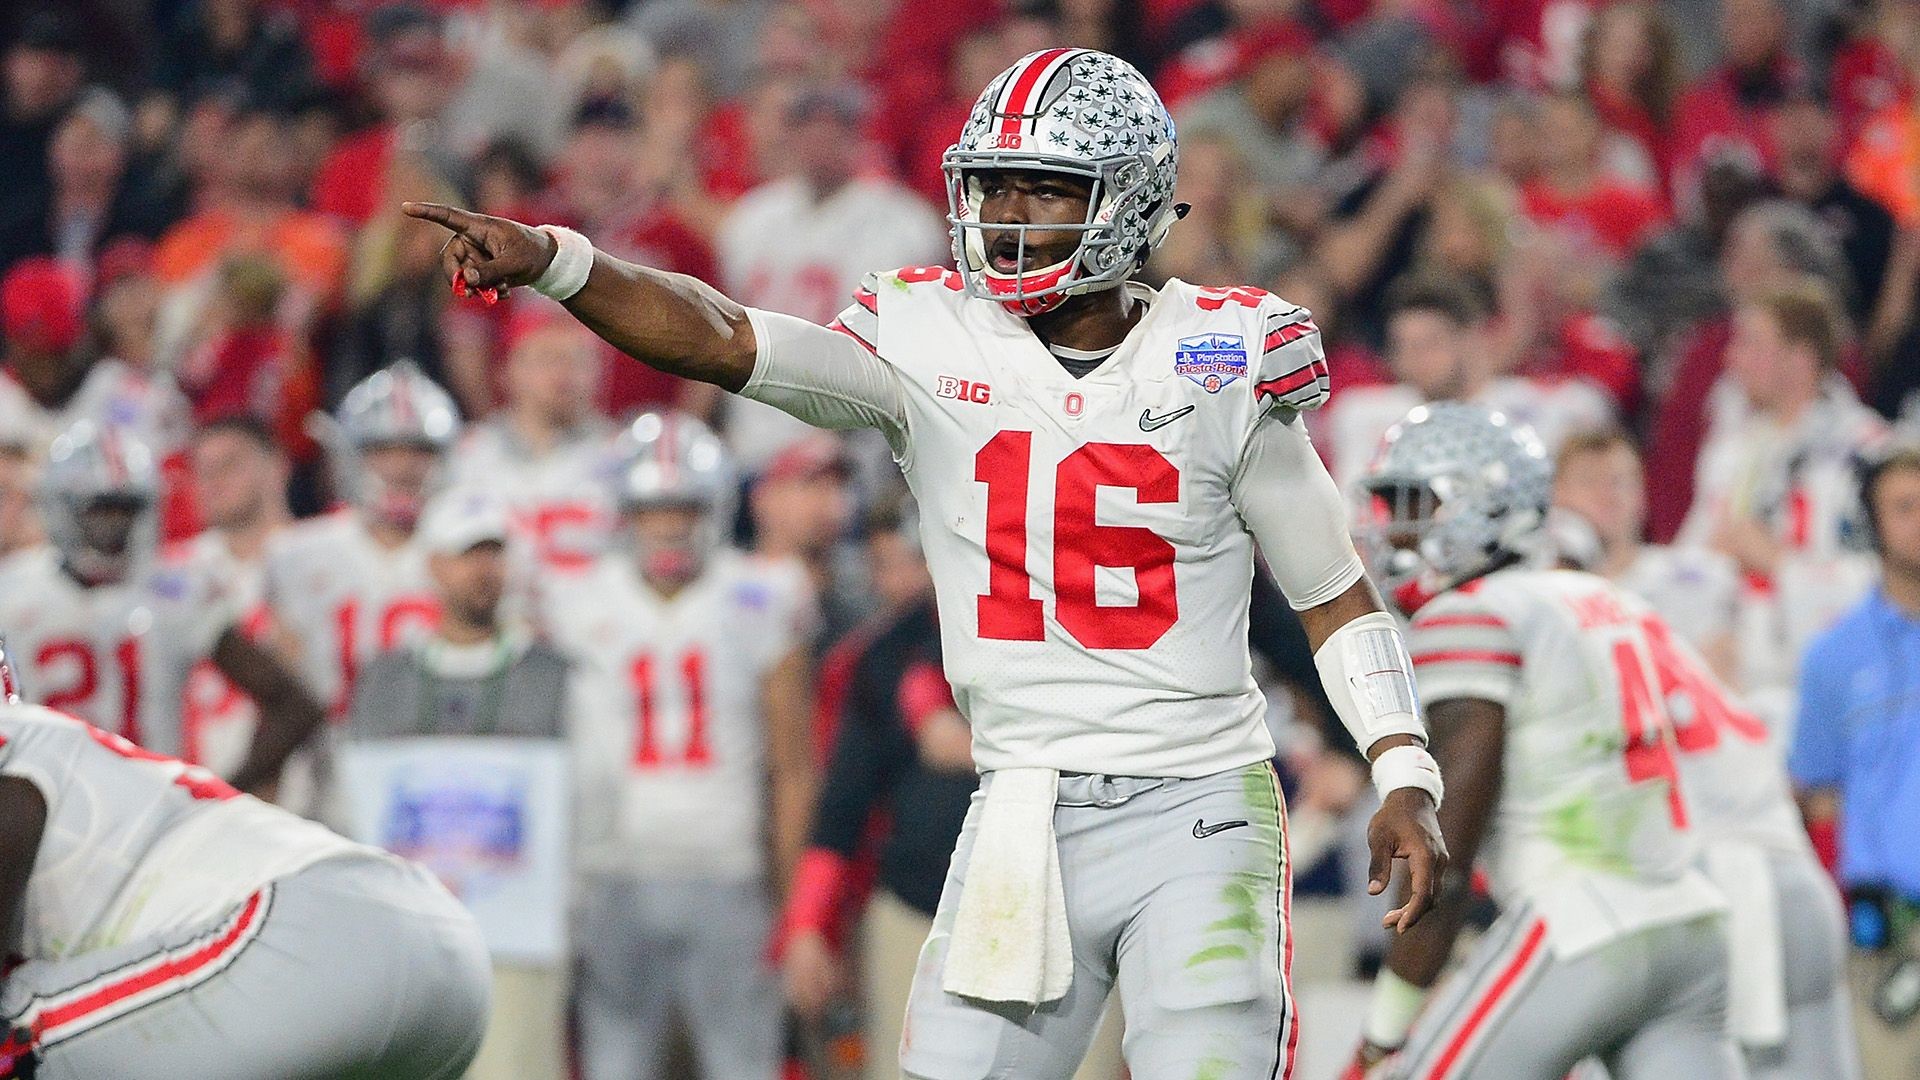 1920x1080 Ohio State's J.T. Barrett in his own words: 'I've practically seen it all'